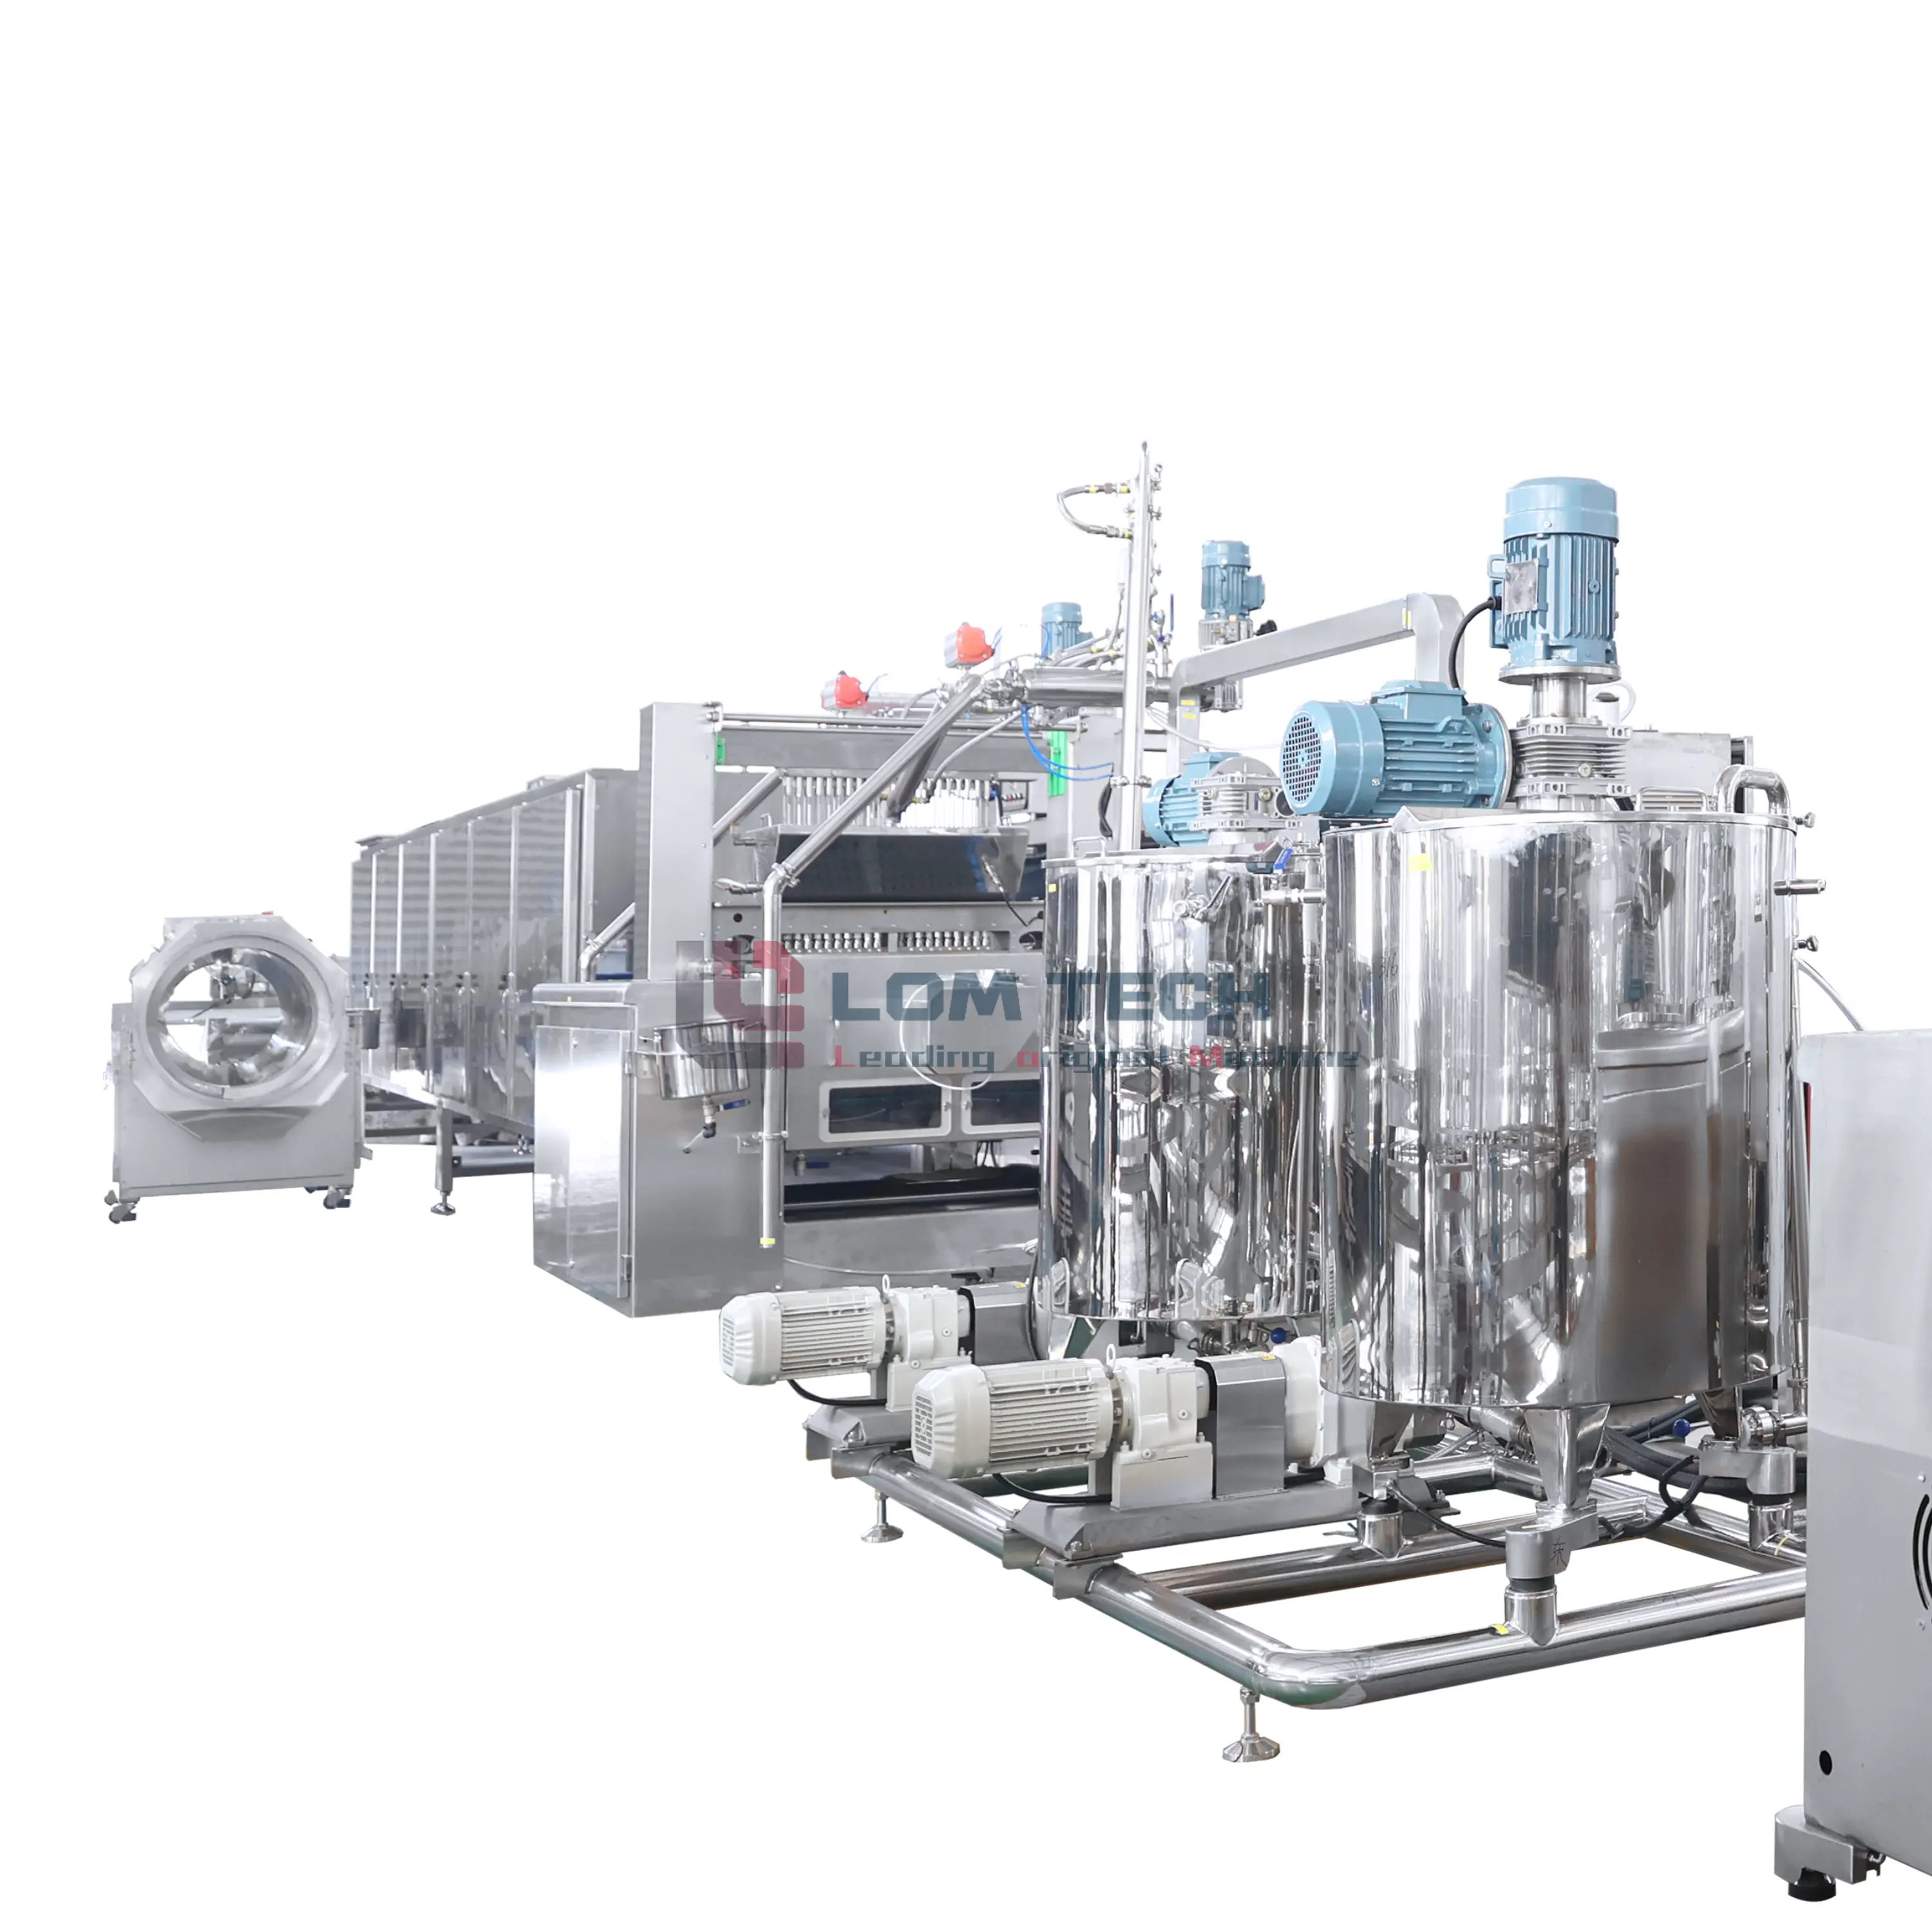 Hot Sale 1 Year Confectionery Coating Pan Machine Spain Machinery Industry Equipment